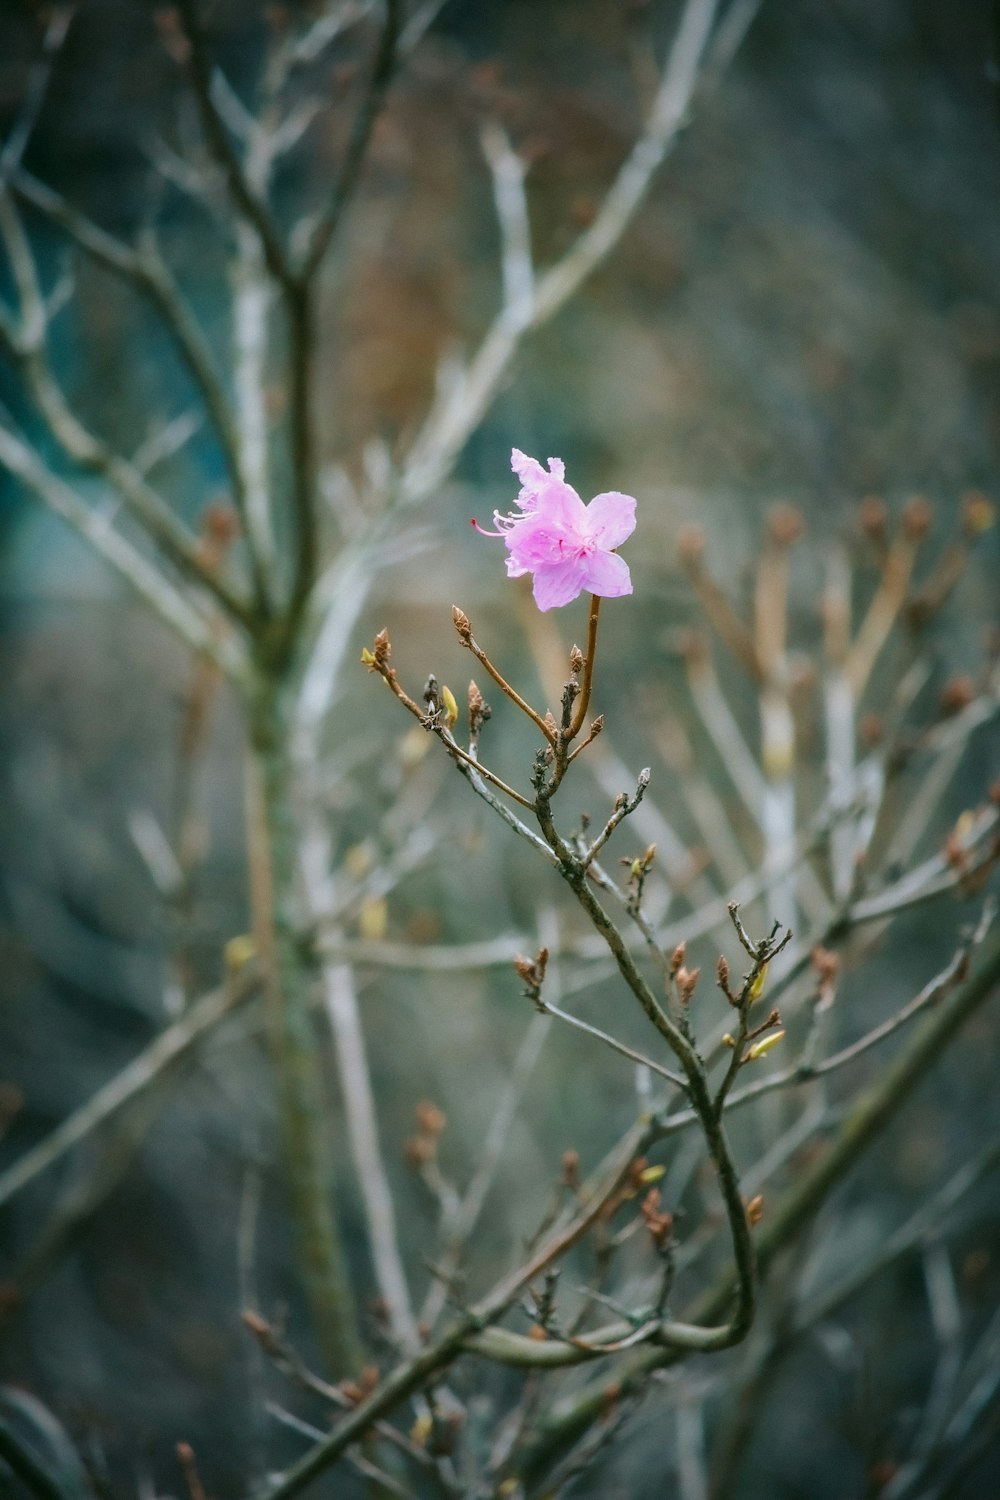 a small purple flower on a tree branch